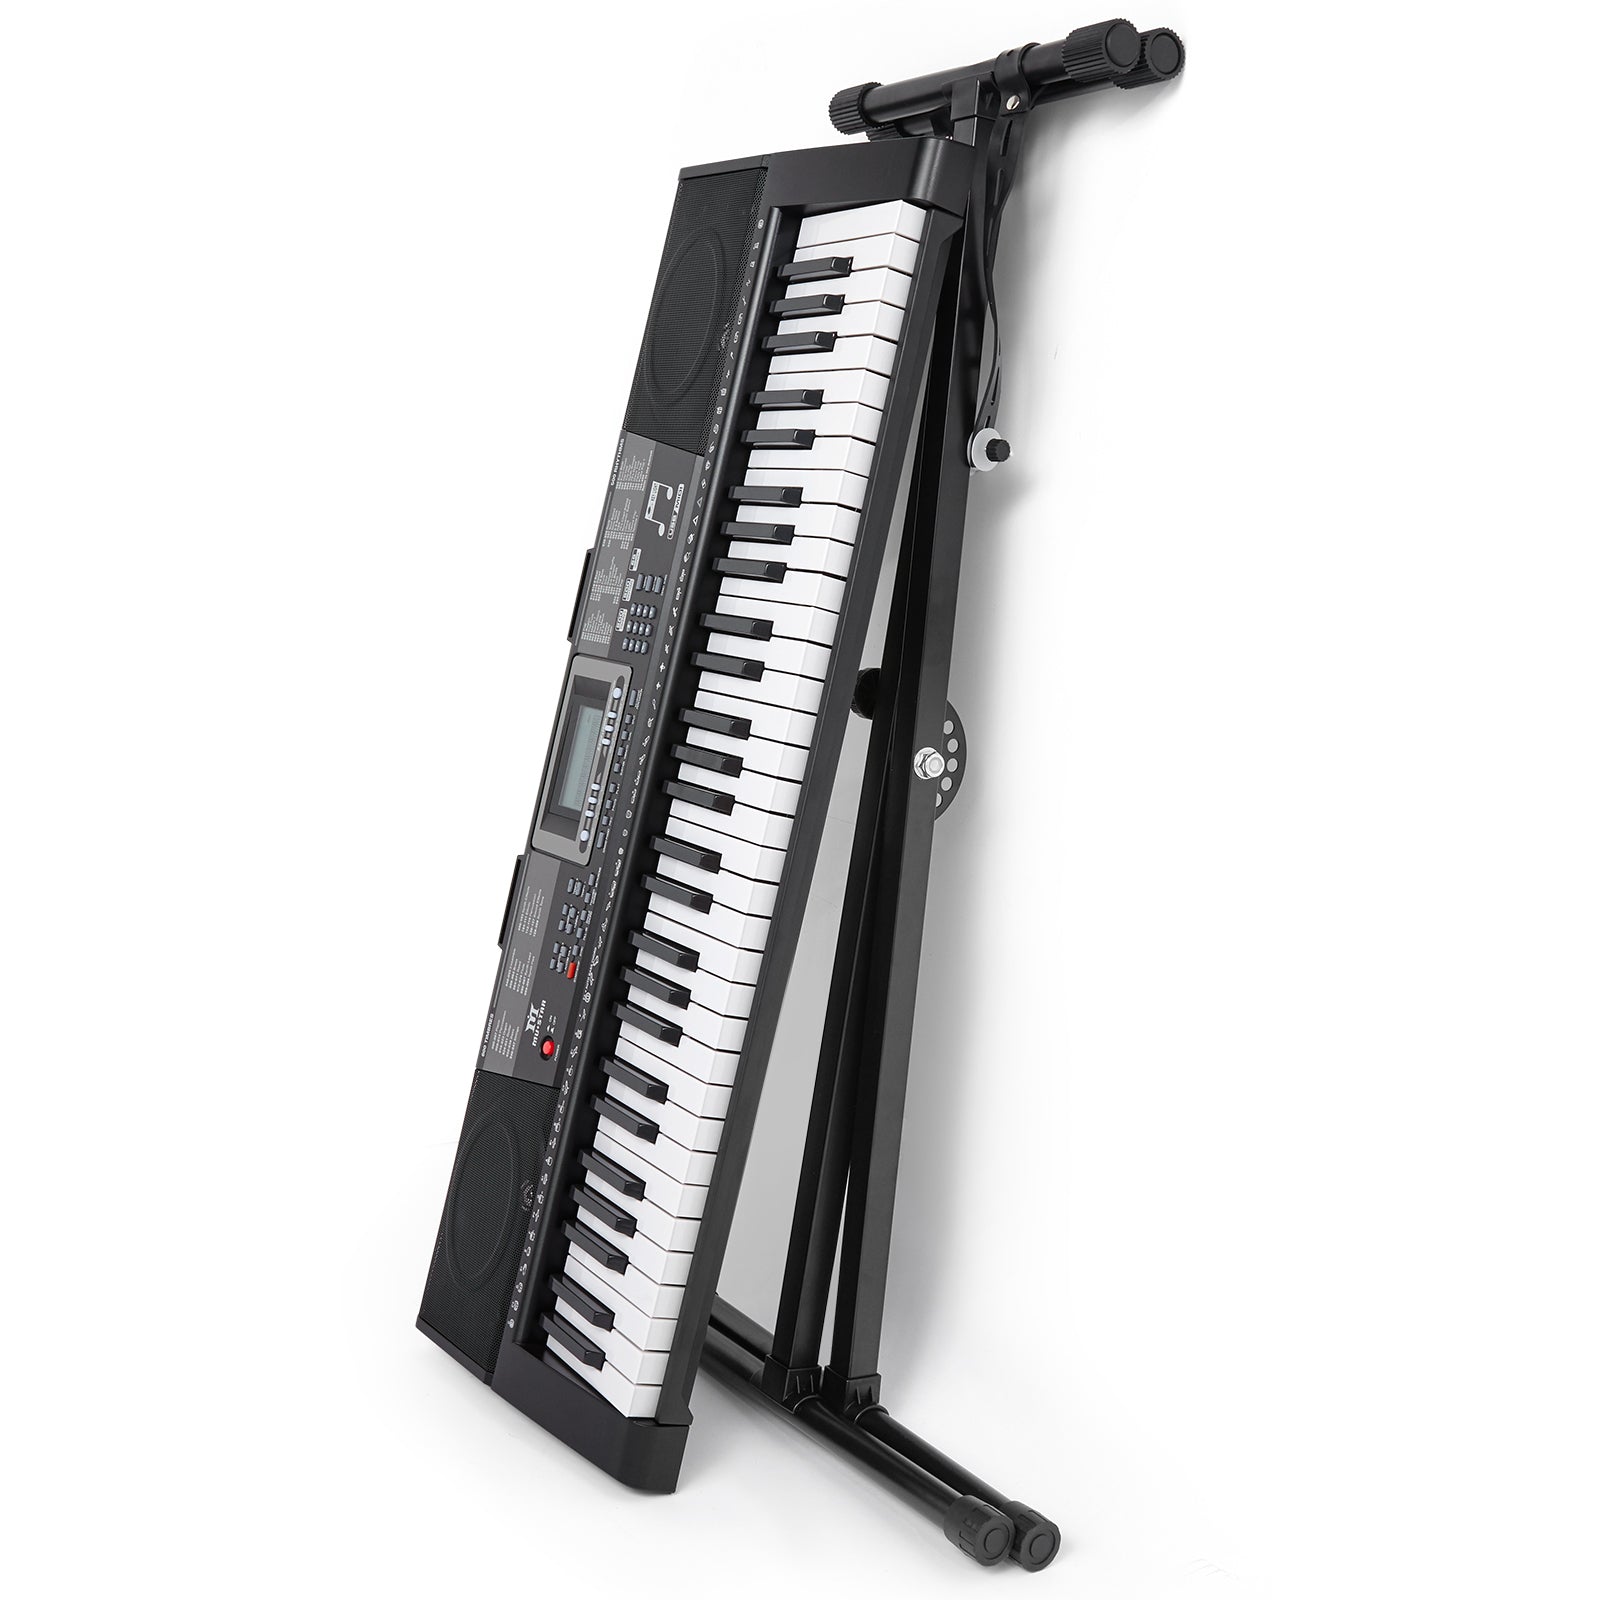 MUSTAR MEKS-500, 61 Key Piano Keyboard, Learning Electric Piano Keyboard, Lighted Up Keys, Teaching Modes, Corded Electric and Battery Powered, for Beginners Black, Gifts